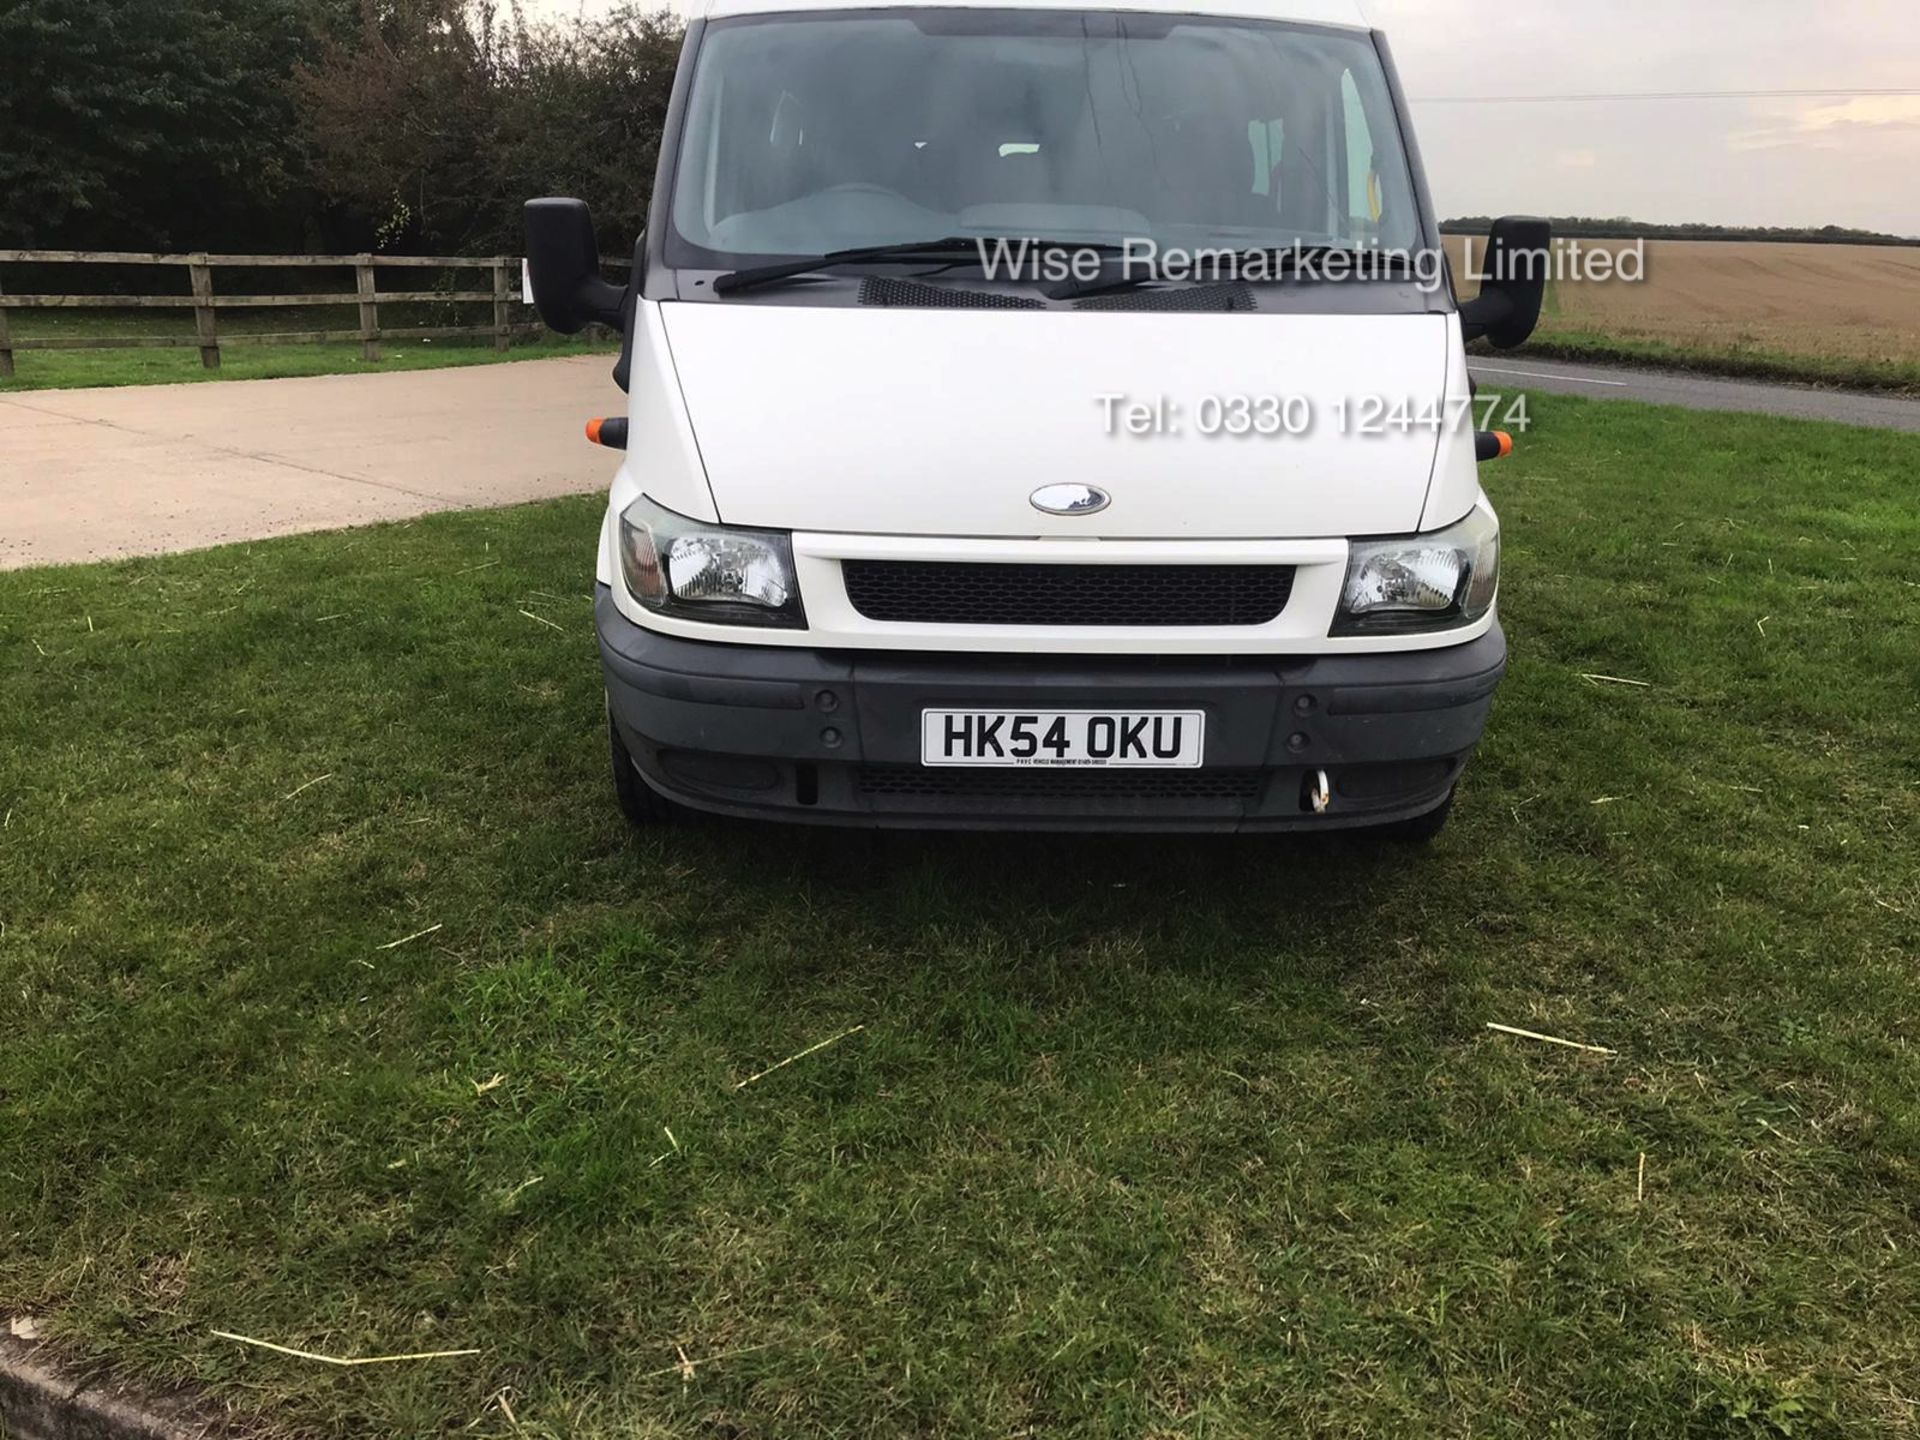 Ford Transit Minibus 2.4l (17 Seater) - 2005 Model - Service History - 1 Keeper - Only 31k Miles - Image 6 of 22